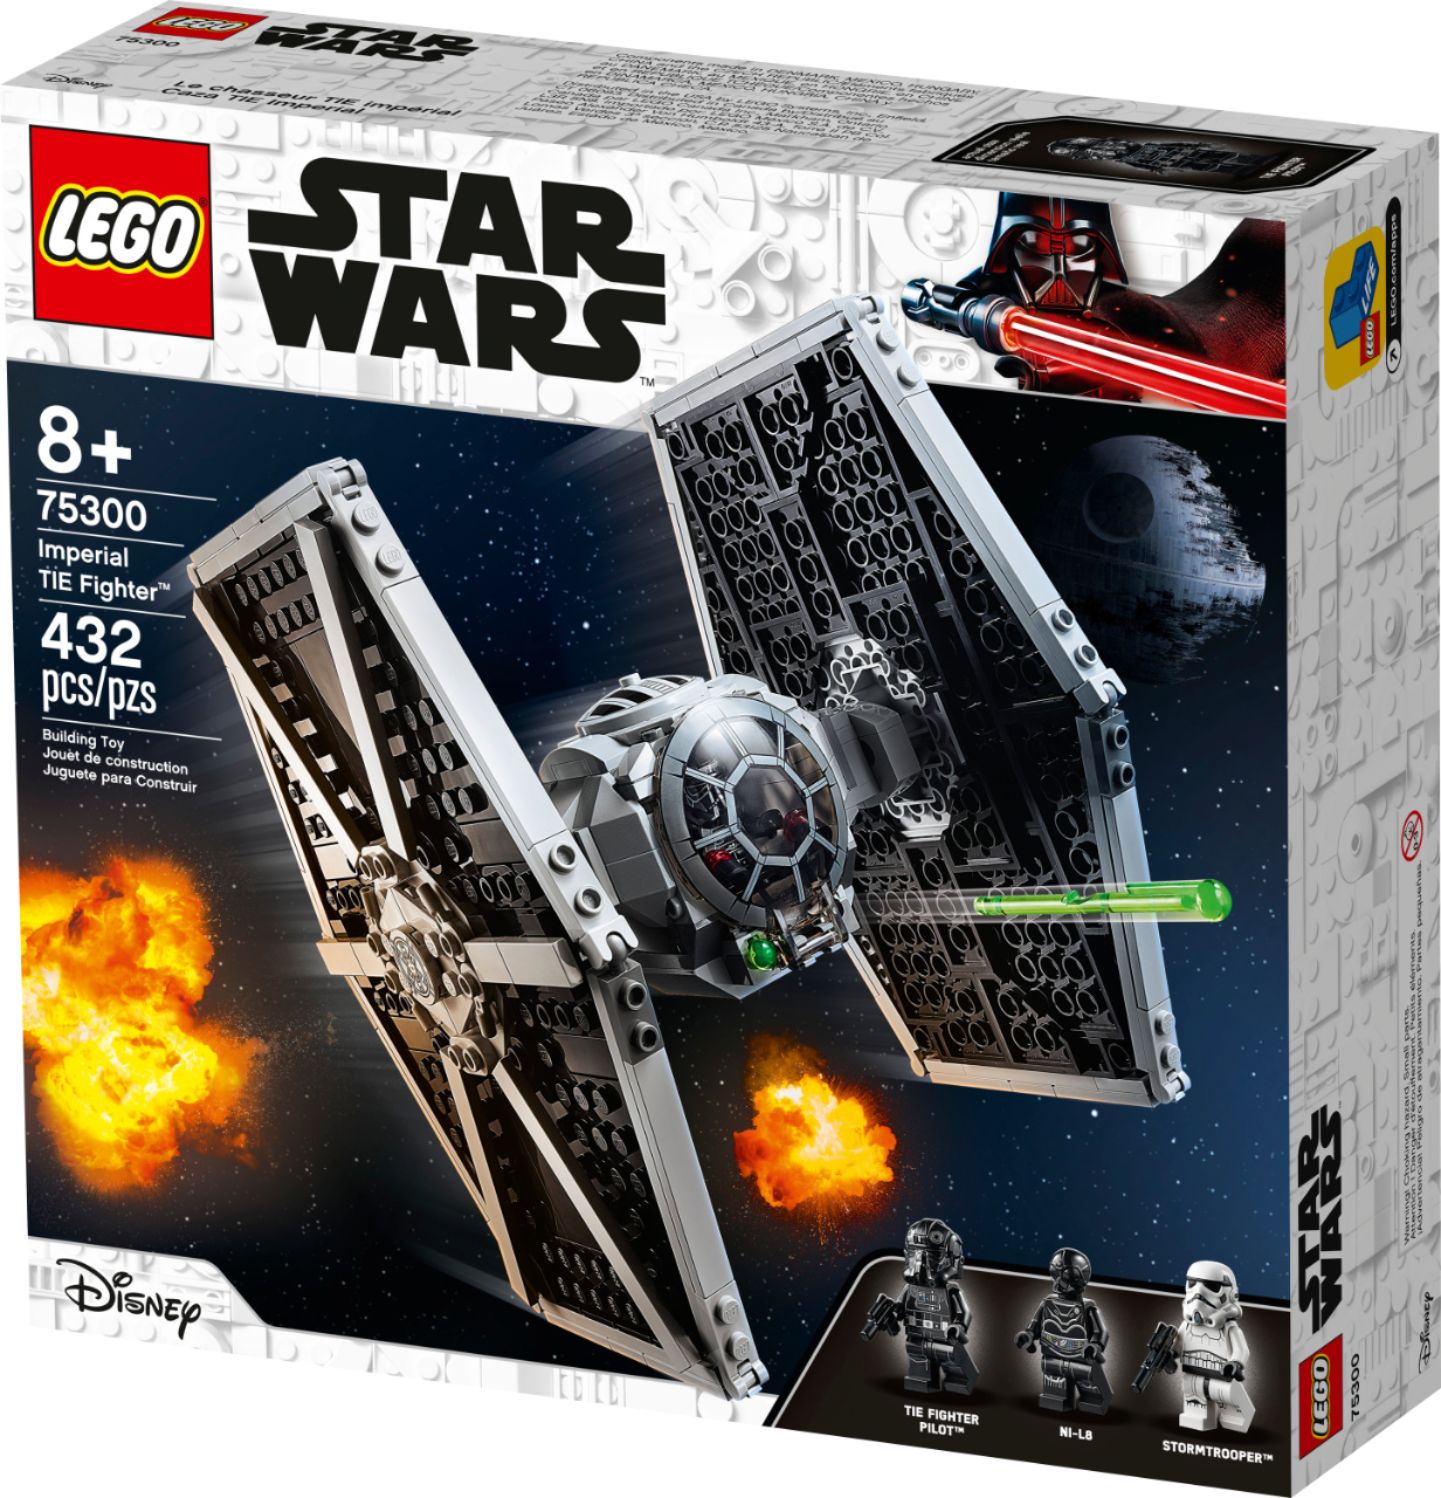 for sale online 432 Pieces LEGO Star Wars Imperial TIE Fighter 75300 Building Kit 